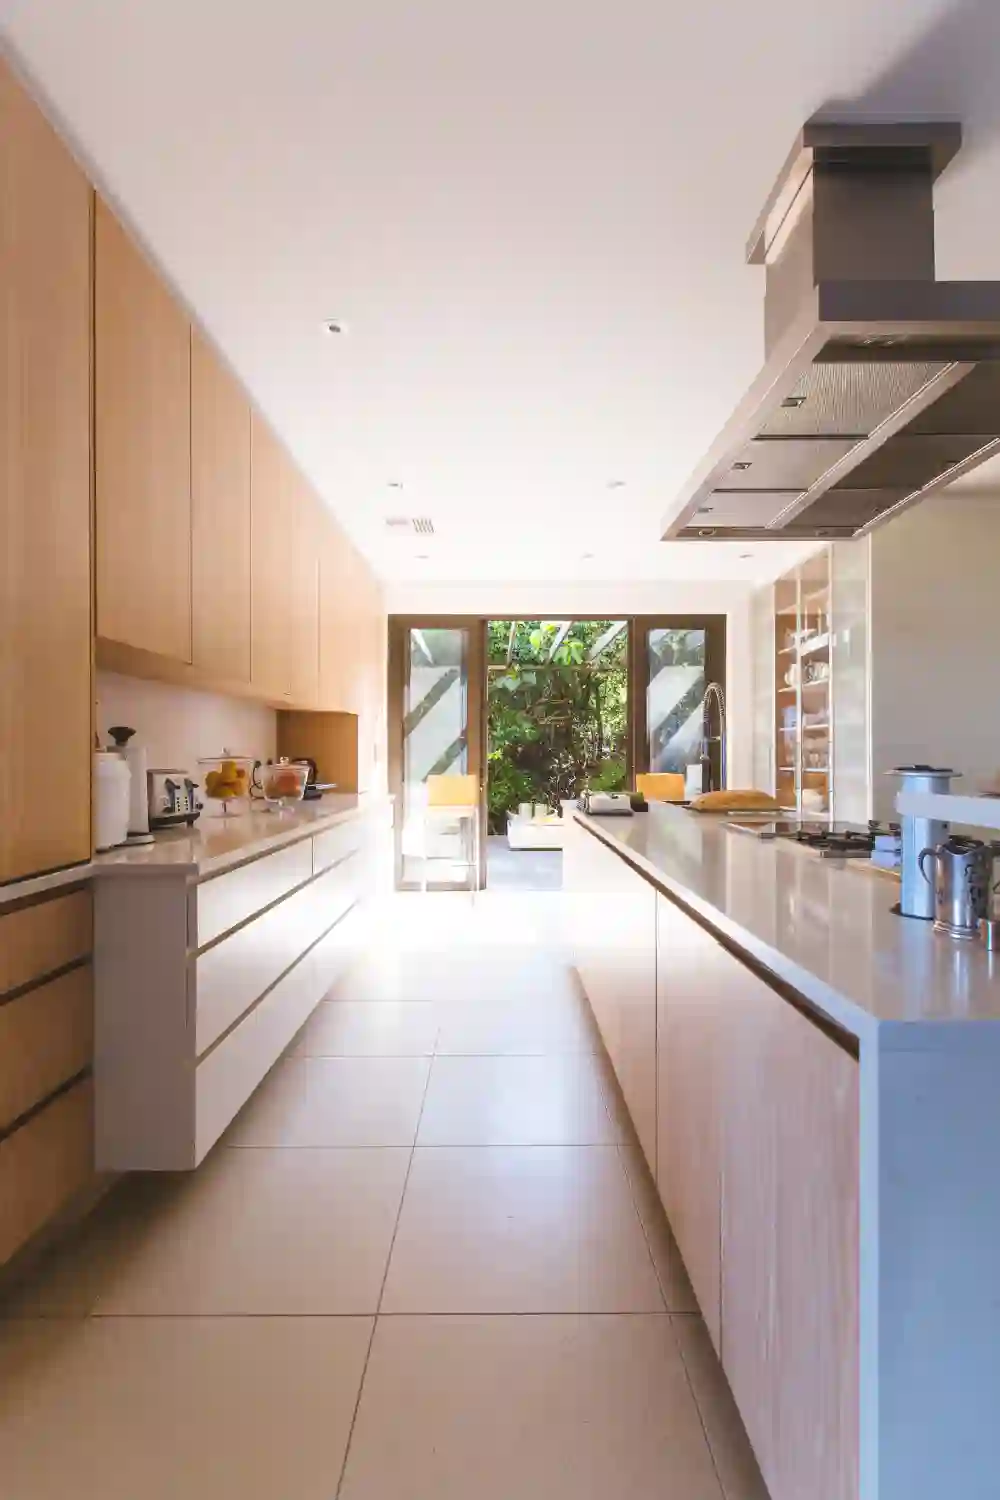 A kitchen extension created by builders who could work for G&M Building Contractors near Oxford and Swindon in the Oxfordshire and Berkshire areas.